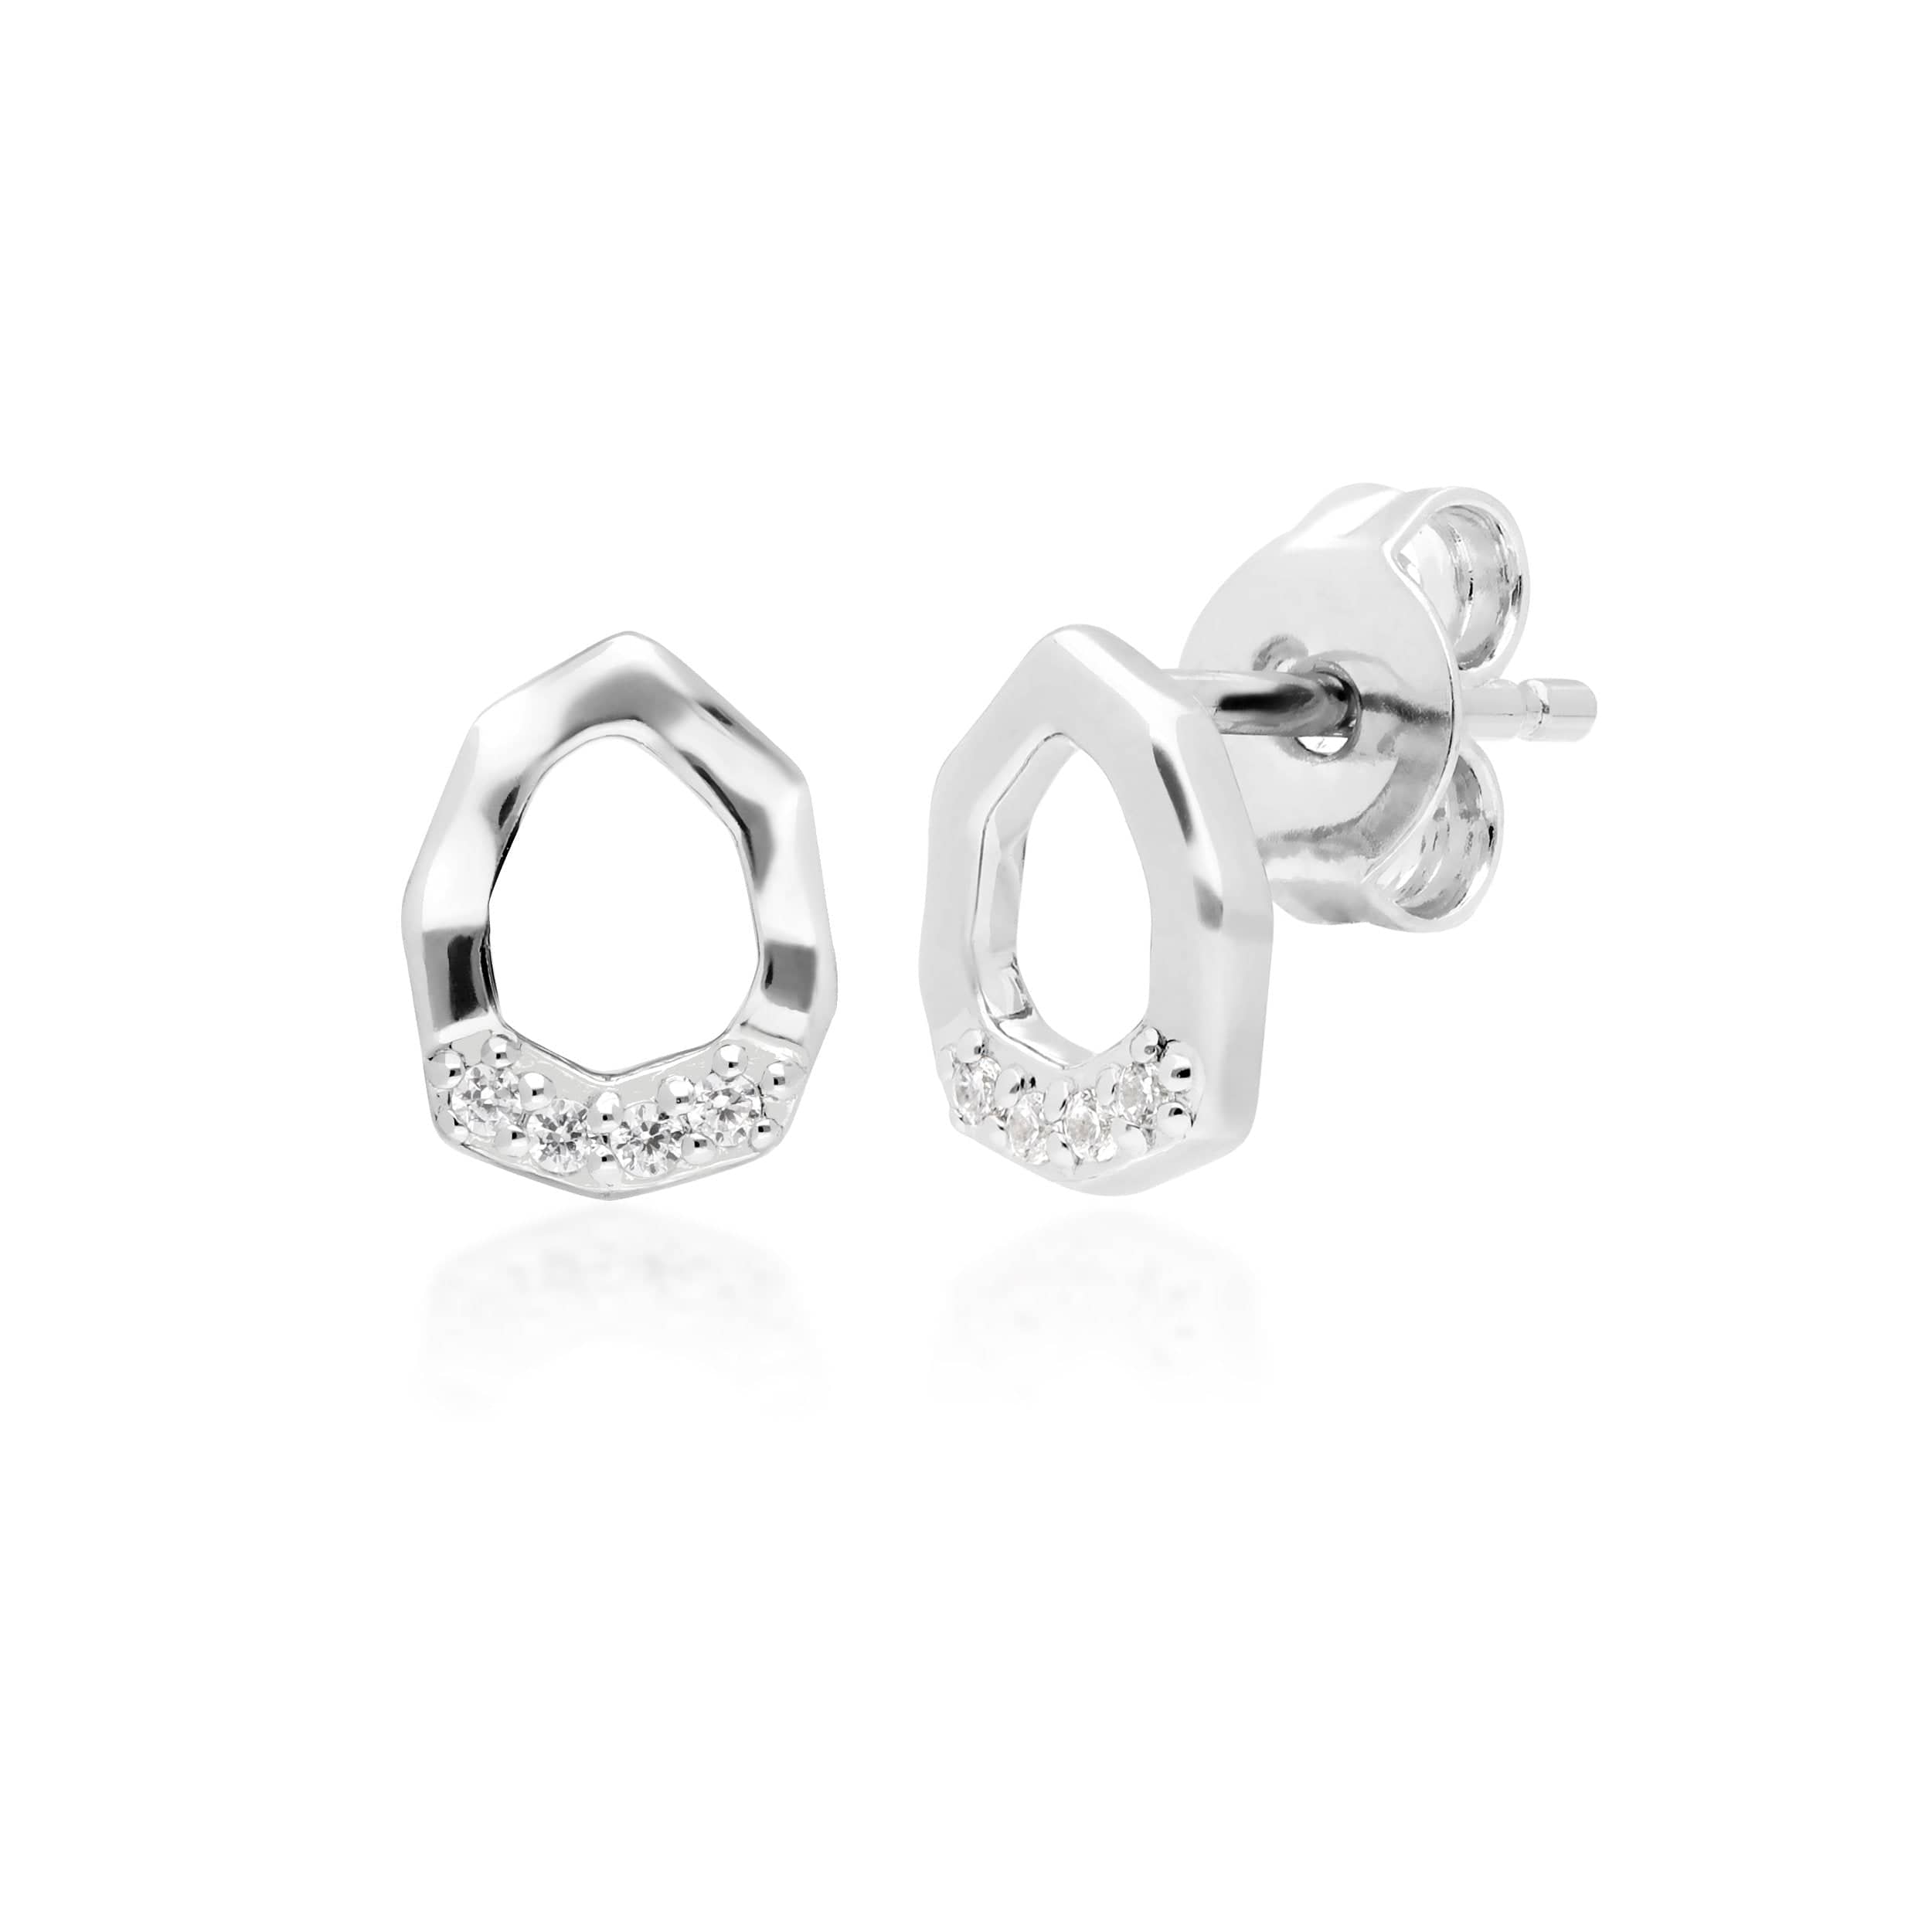 Diamond Pave Asymmetric Stud Earrings in 9ct White Gold